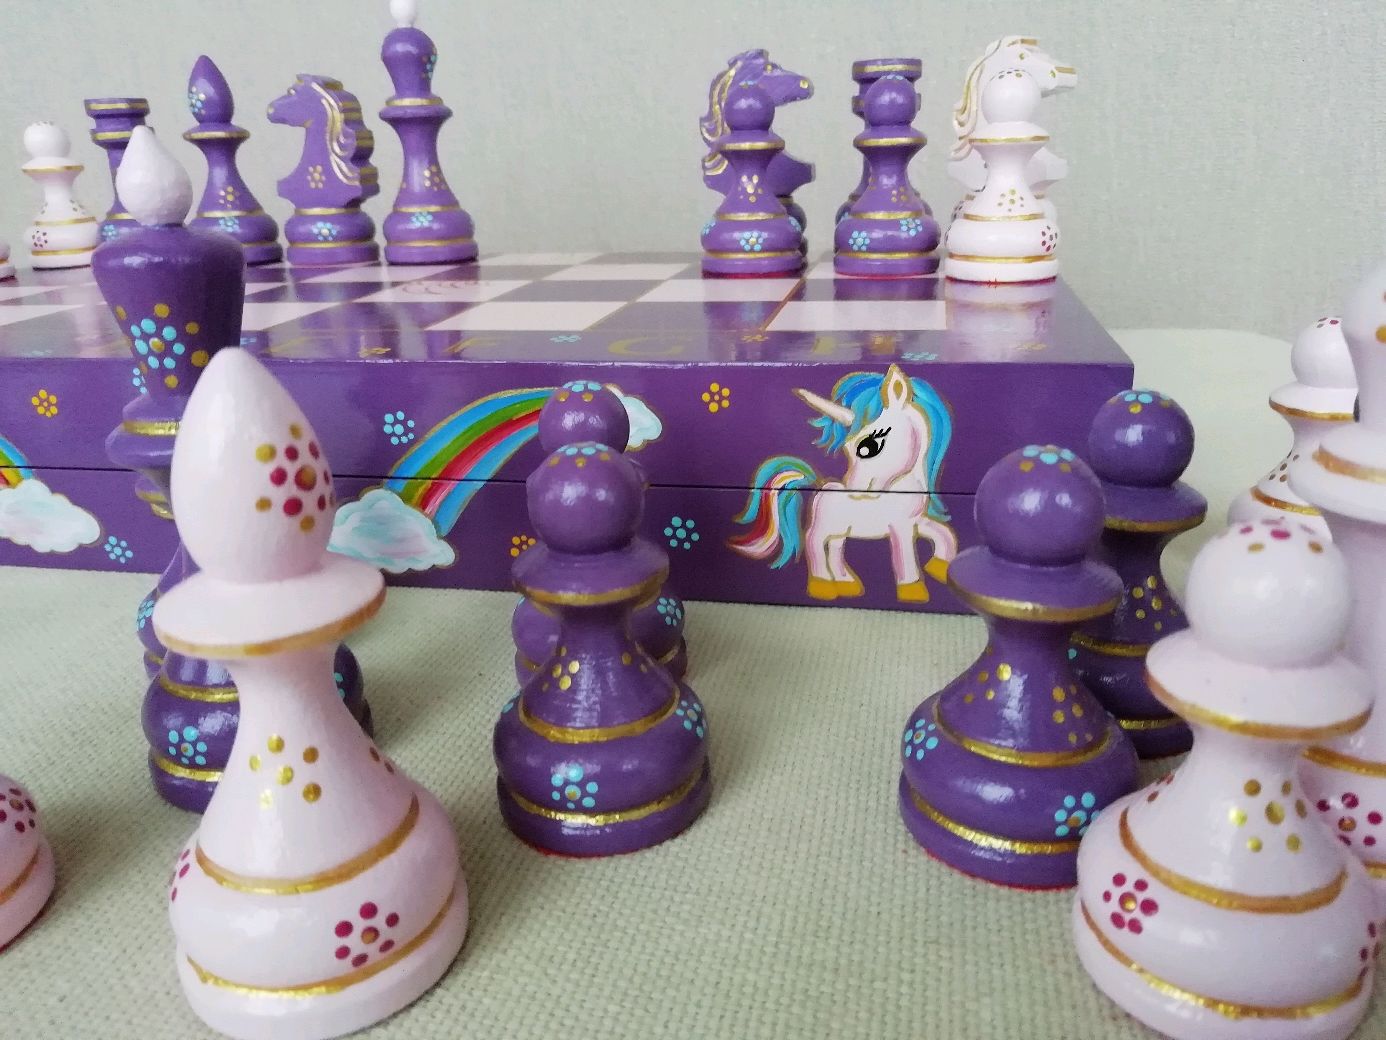 Wooden Pieces Chess Set Wood Hand Carved Board Children Kids Toy Multicolor G 